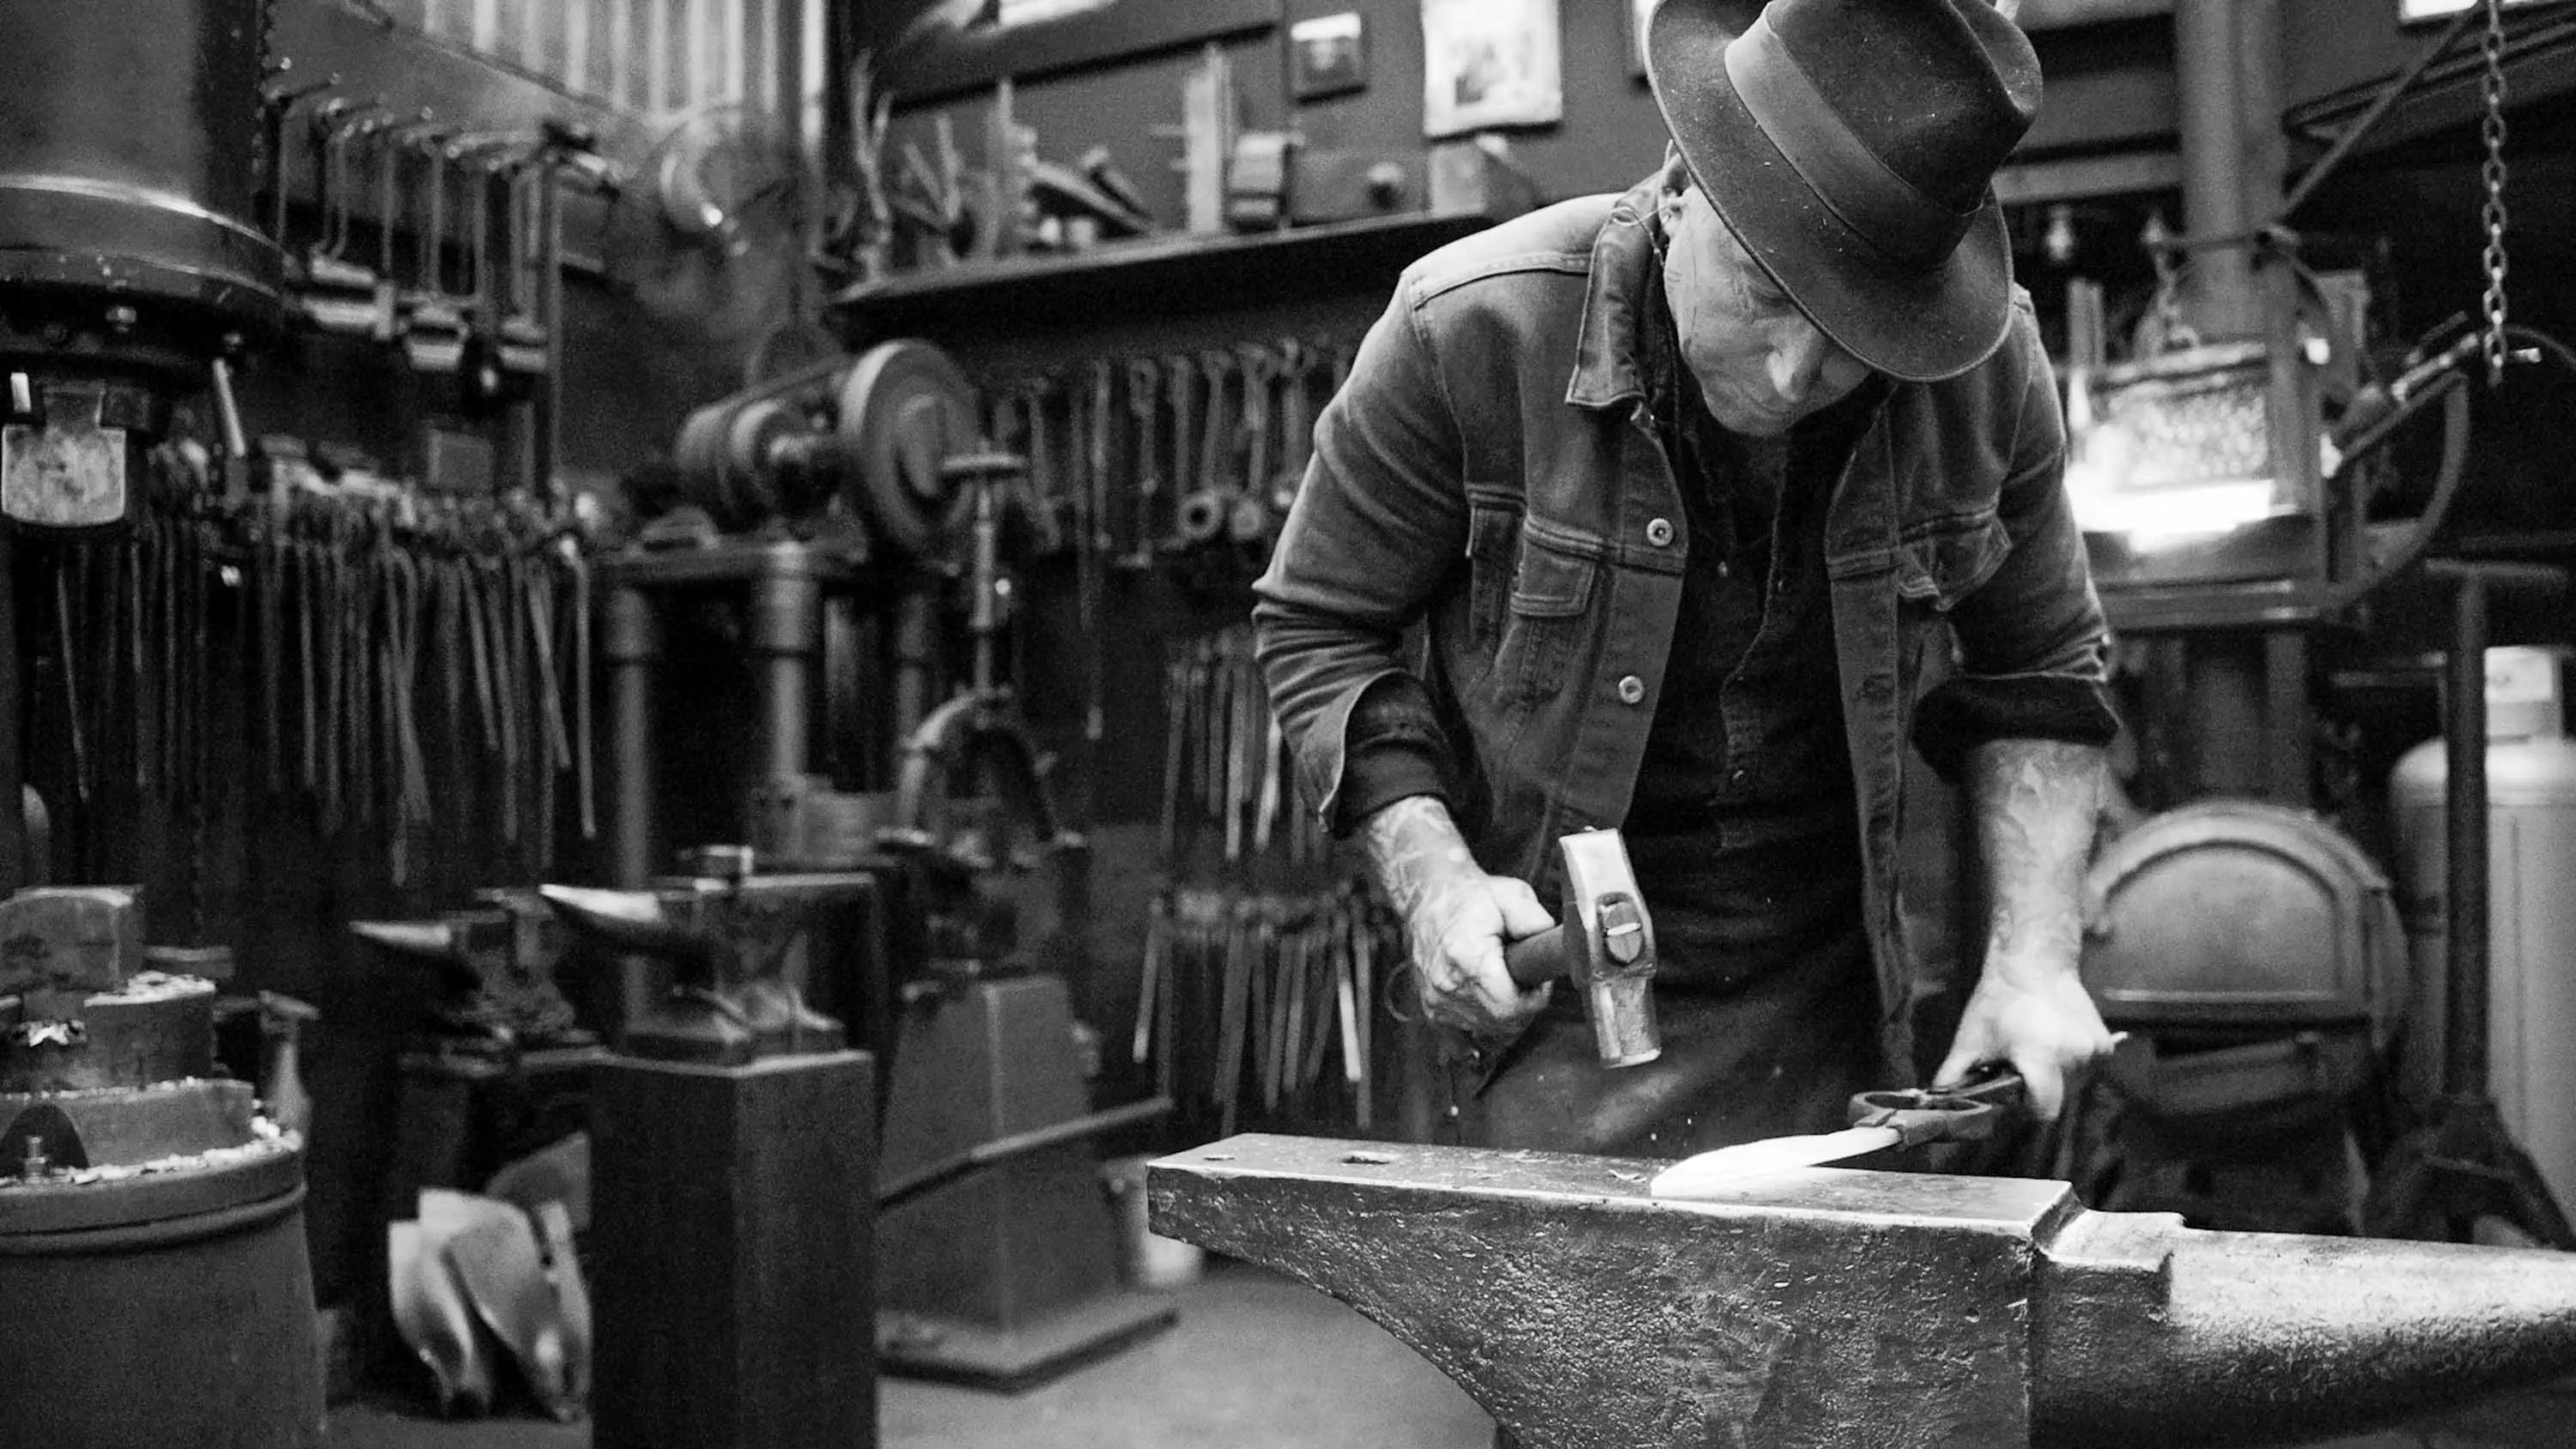 A man wearing a hat works at a piece of white-hot steal on an anvil with a metal hammer.